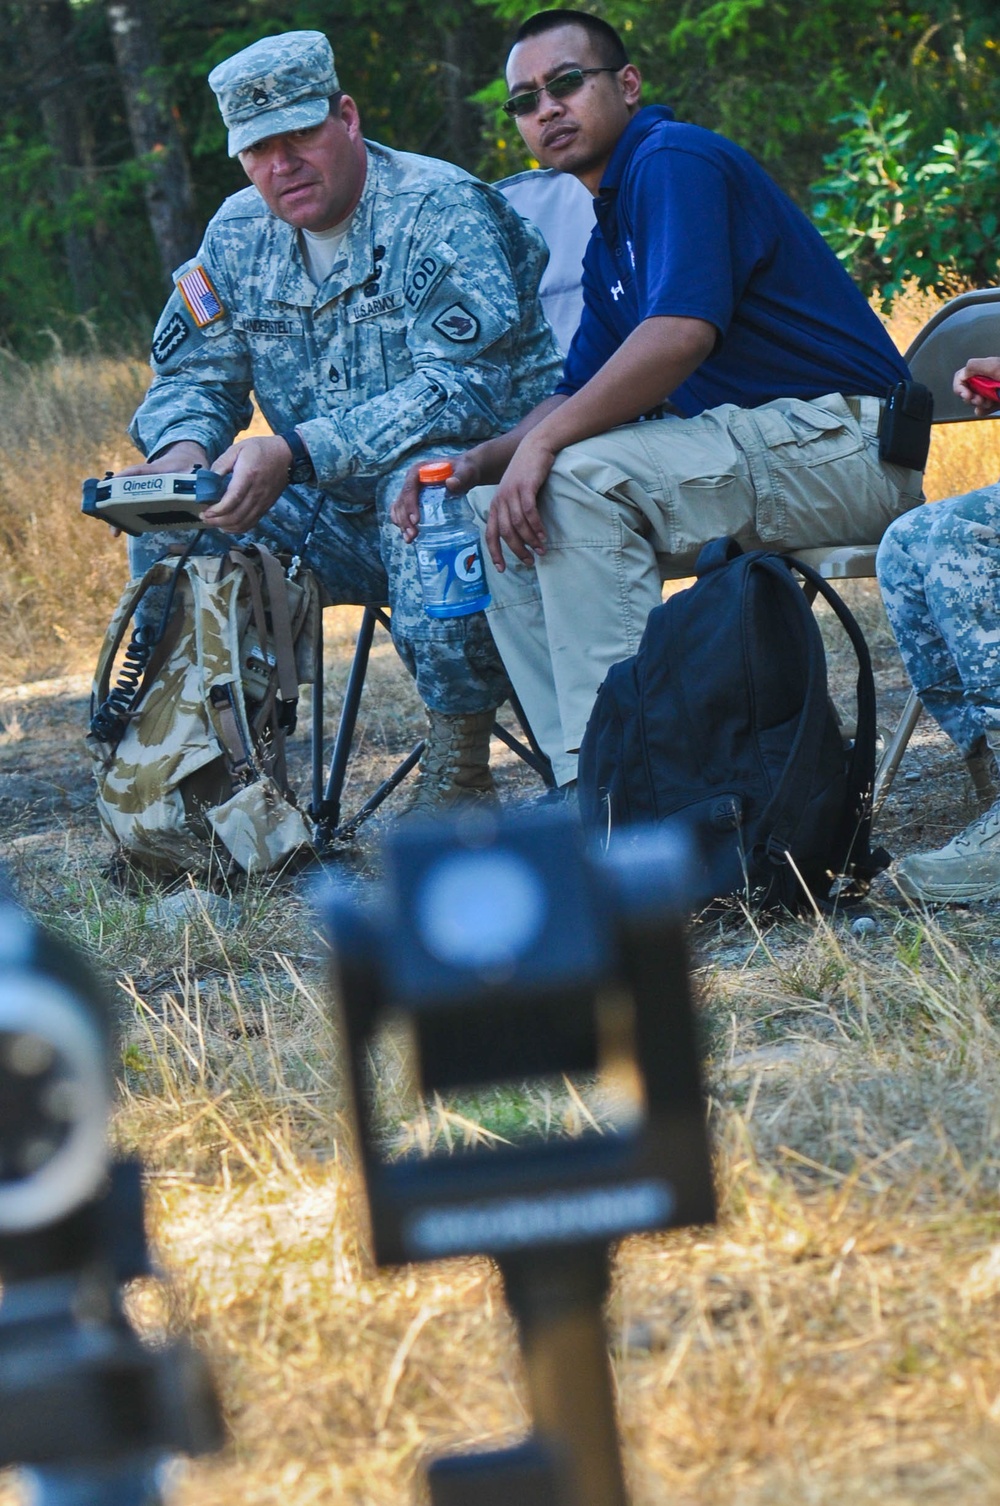 Explosives live-fire exercise a hands-on forum for military, civilian bomb techs alike